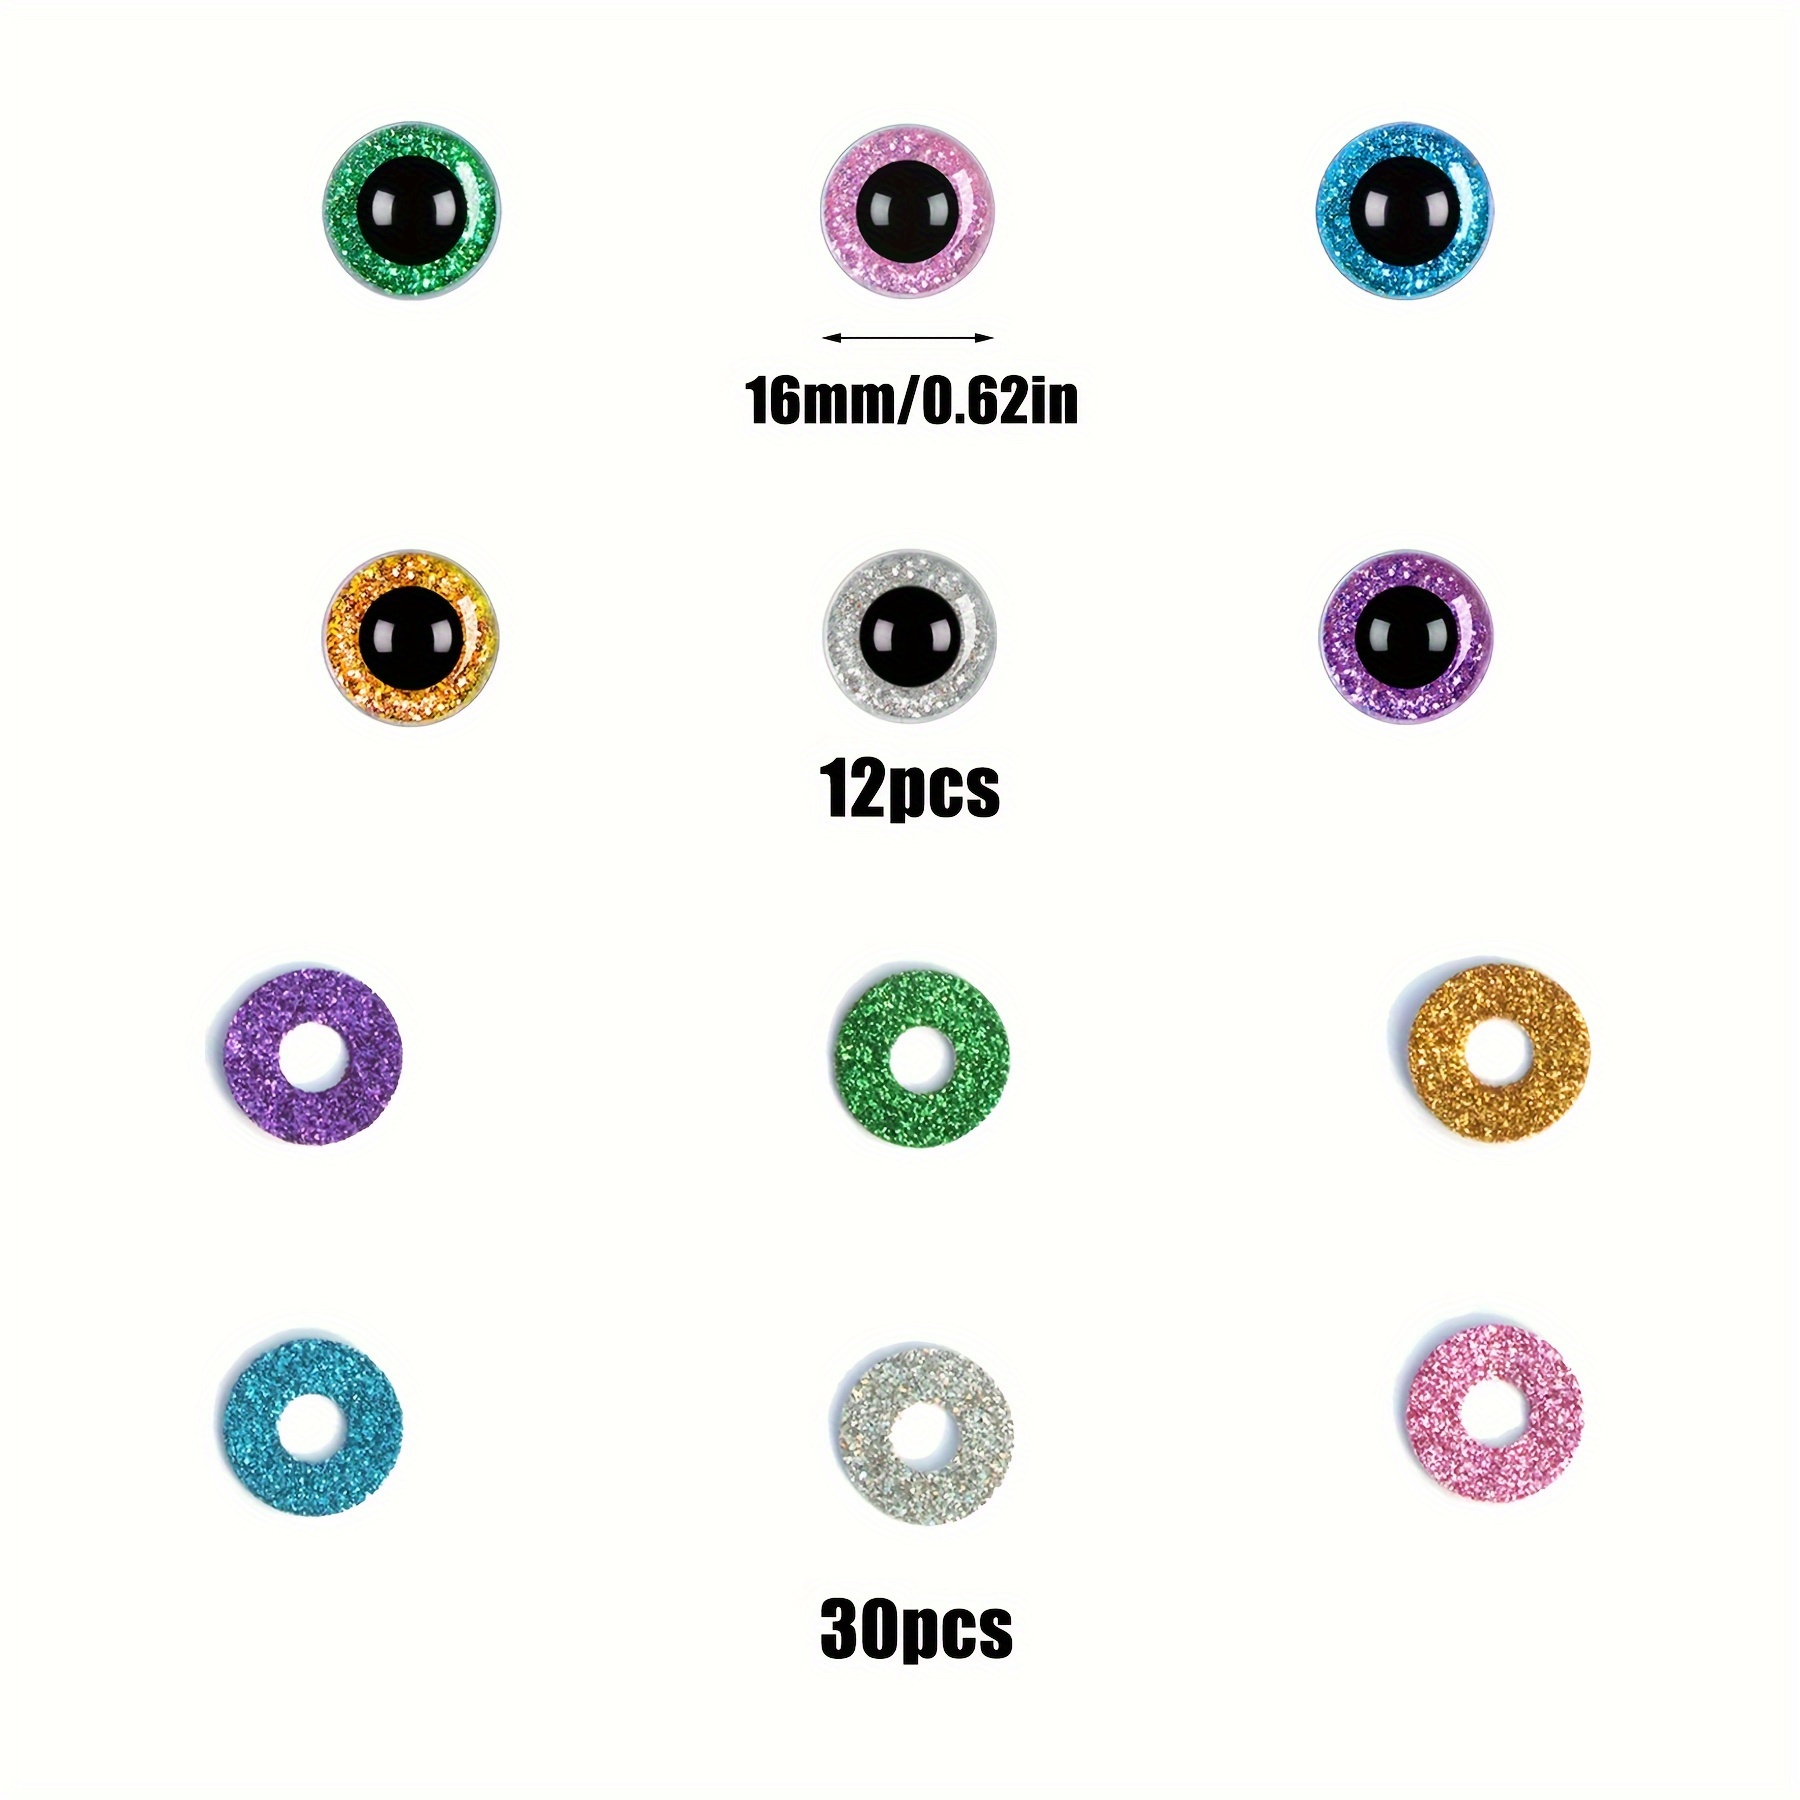 20pcs 10 Kinds of Color 9-24mm Tiny Round Plastic Clear Toy Animal Safety  Eyes Crystal Eyes Glitter Nonwovens White Hard Washer